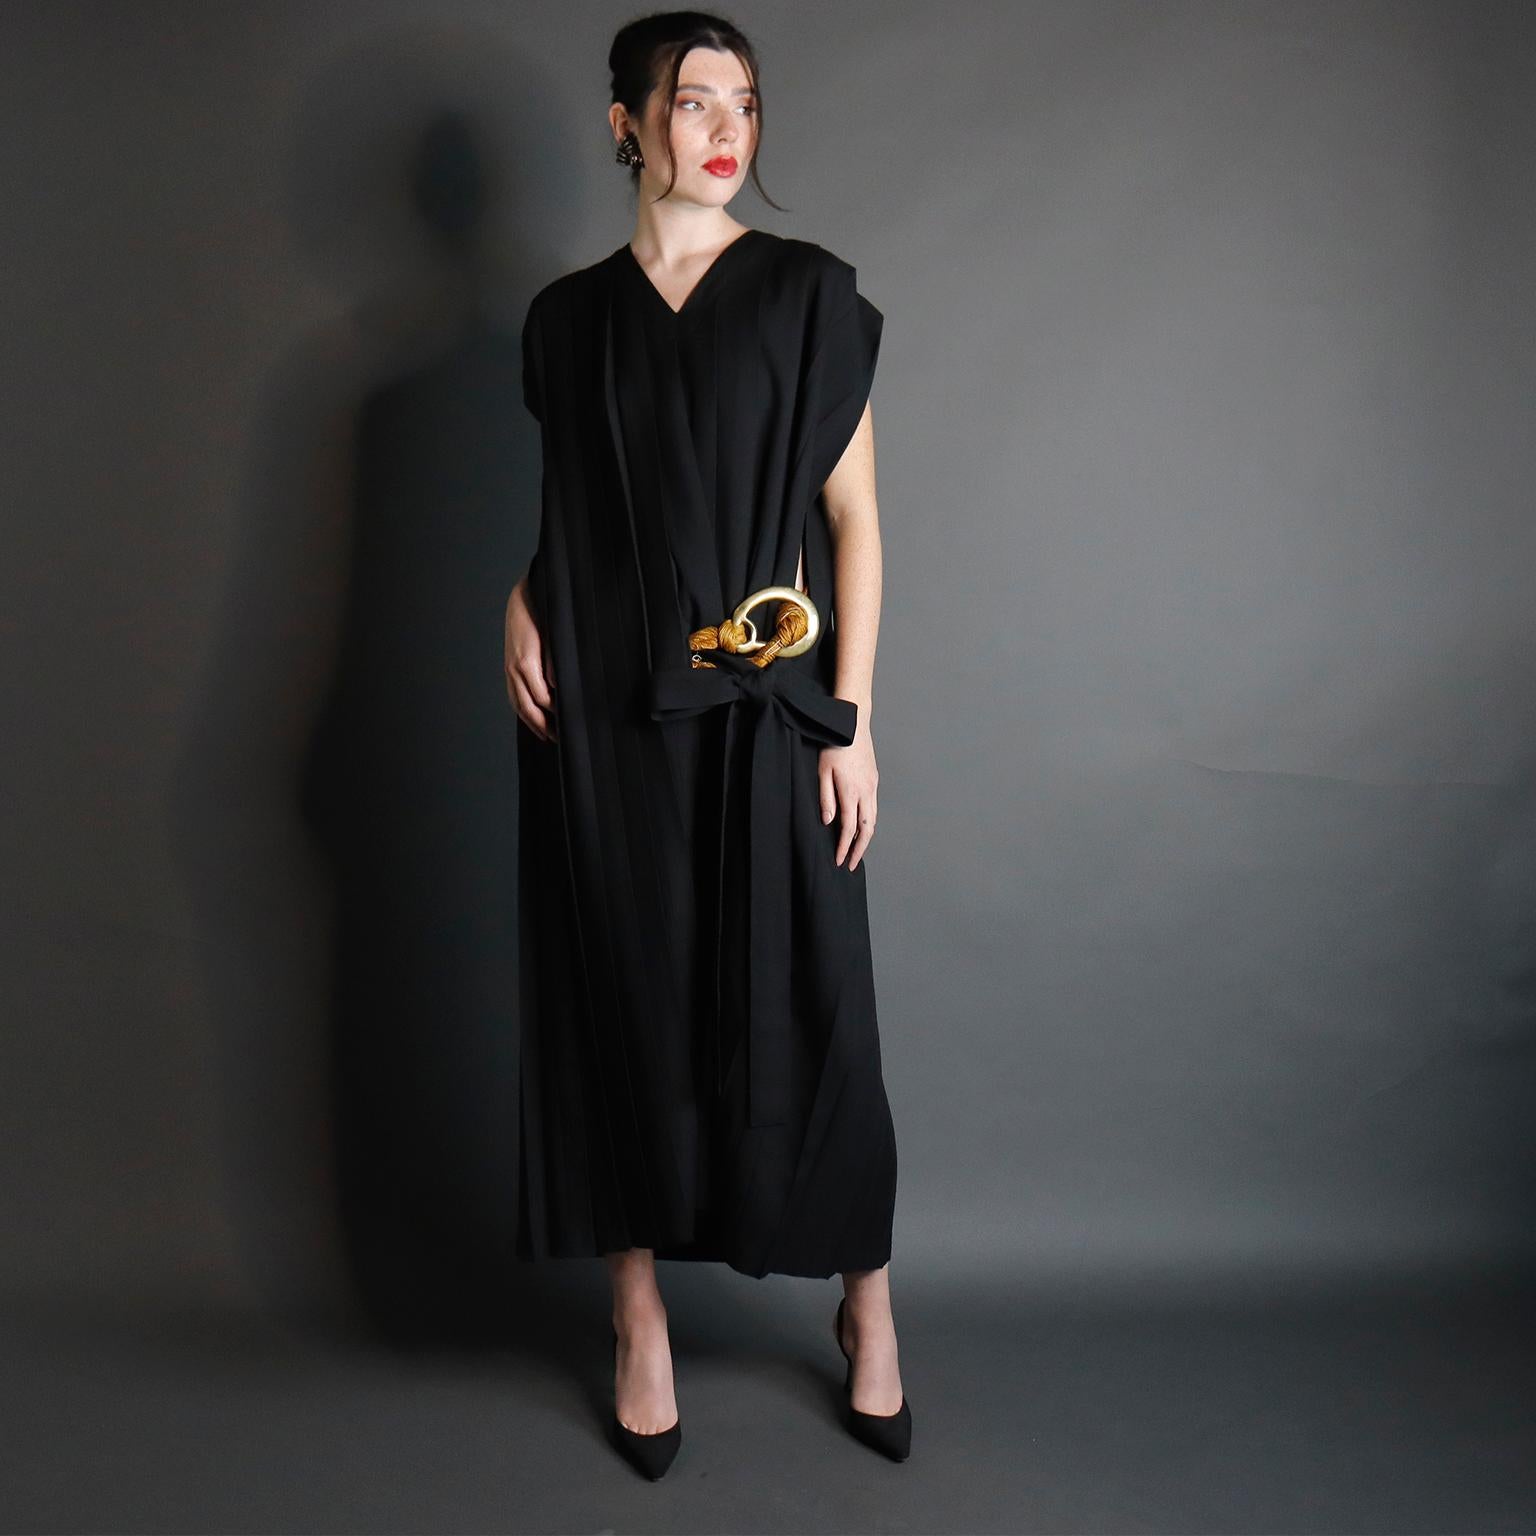 This rare vintage Comme des Garcons dress is from the 1985 runway collection. This avant garde black wool challis dress is vertically pleated throughout with 1'' to 2.5'' pleats. The dress has a straight, rectangular fit with rounded shoulders with